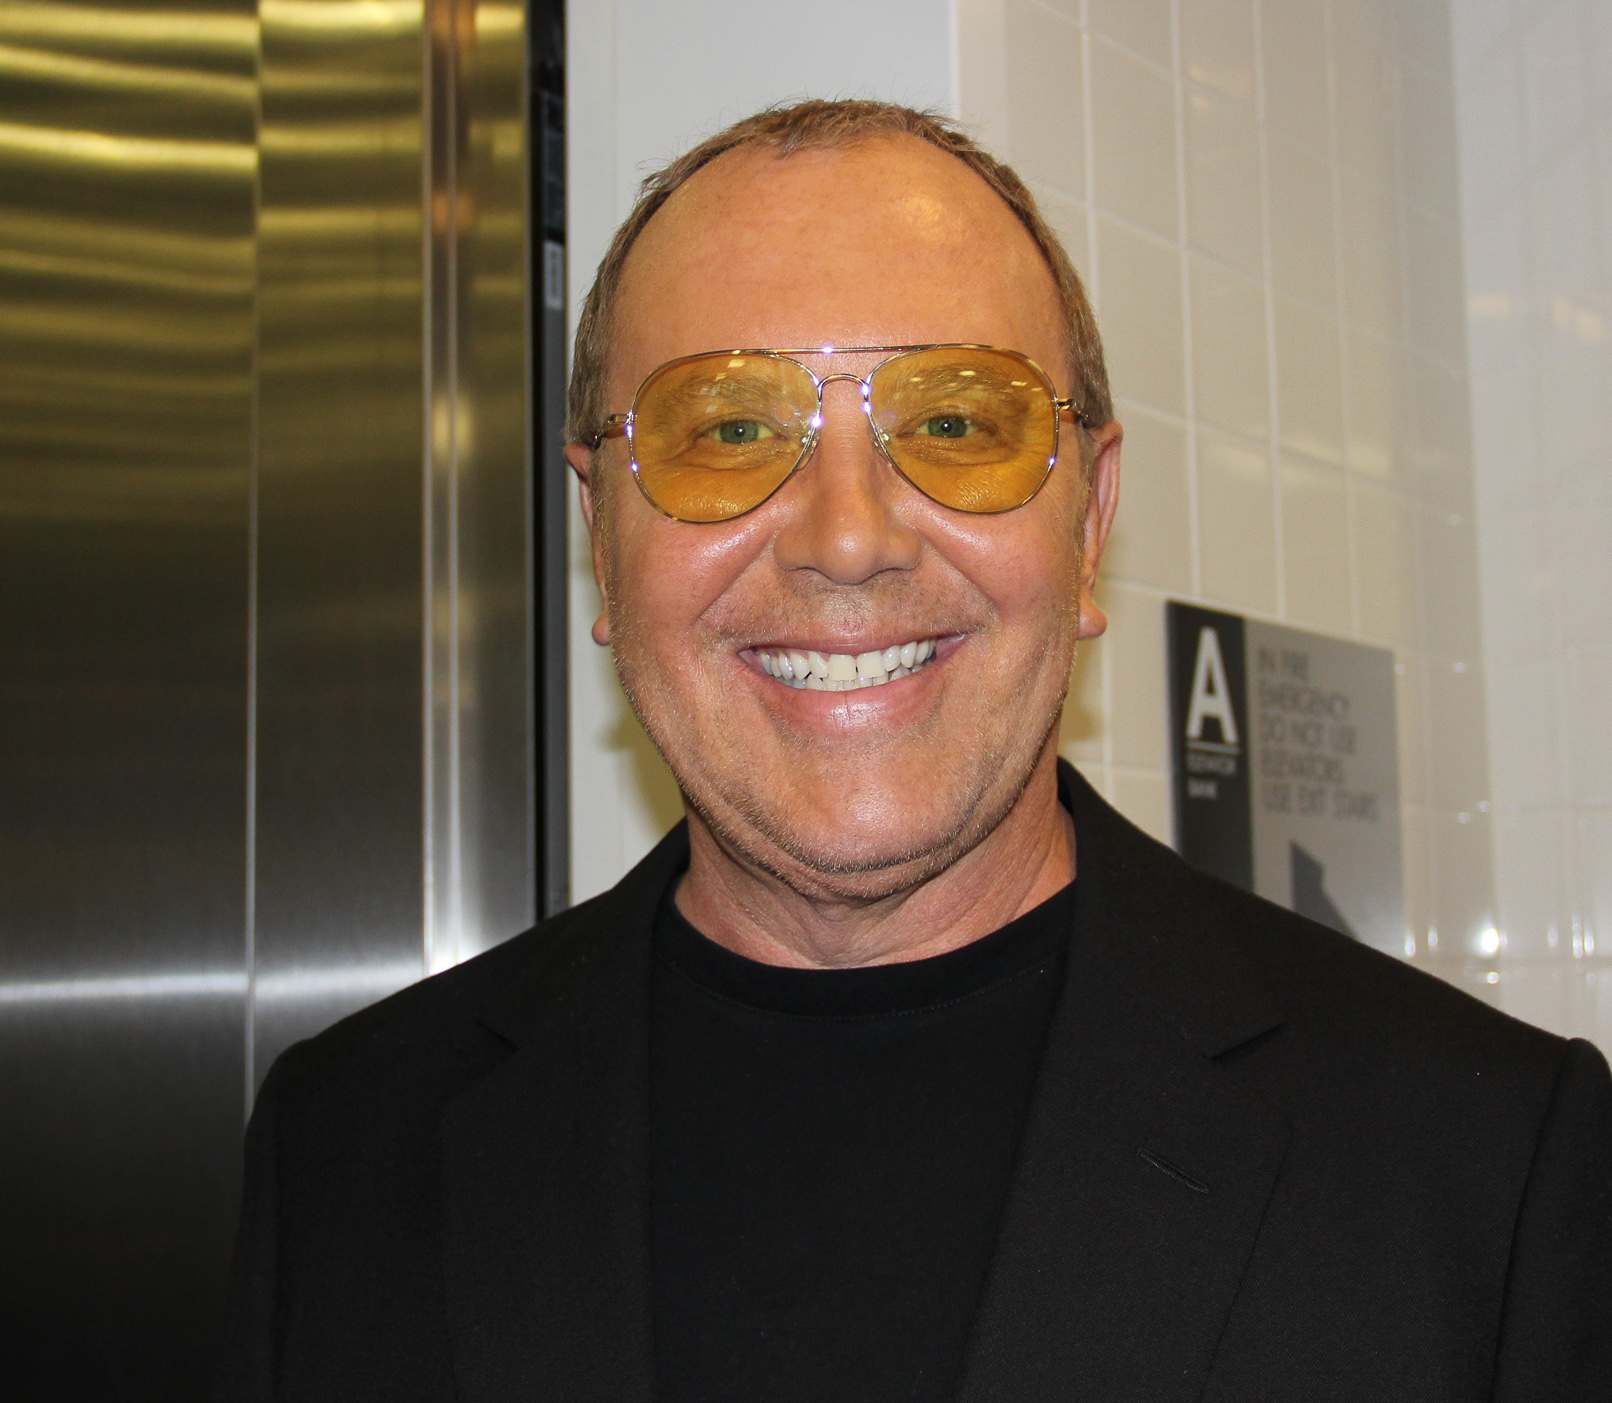 Michael Kors helped make the organization’s expansion possible with his extremely generous gift.